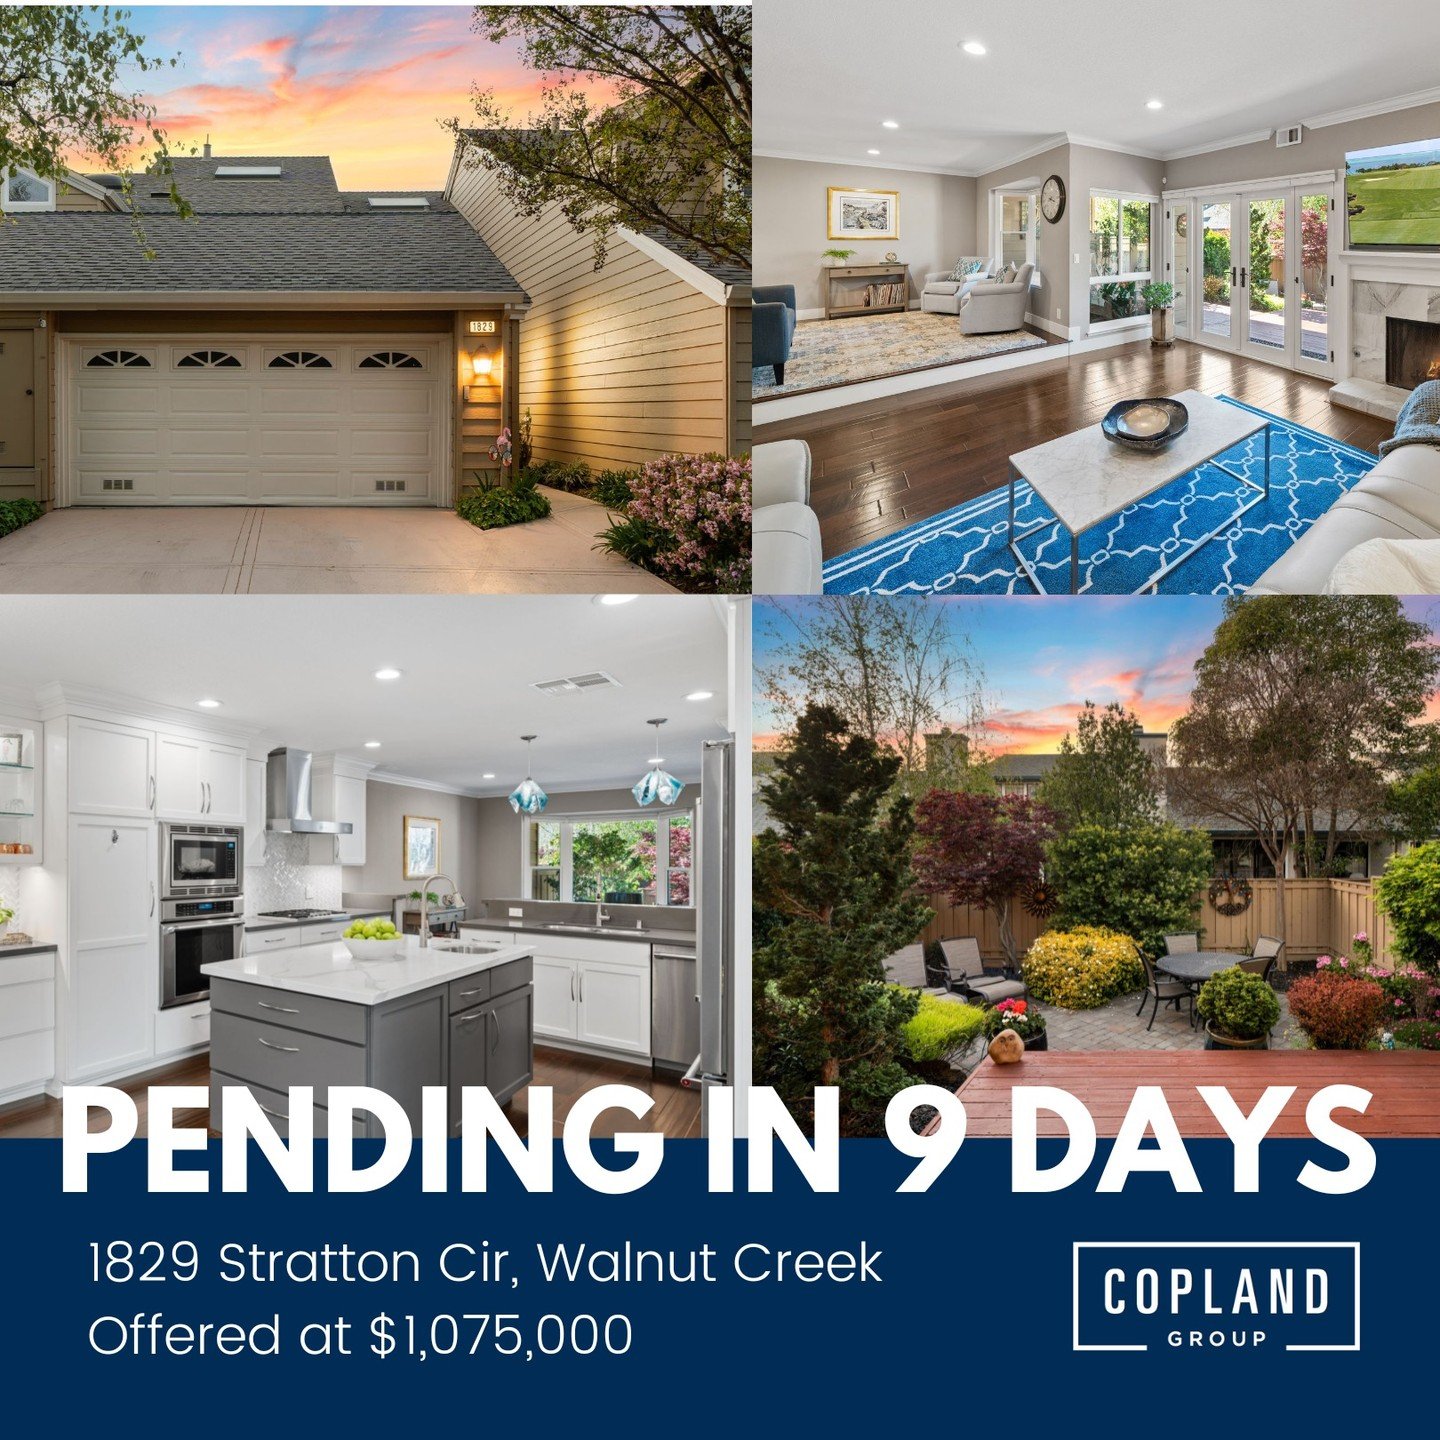 🤩🎉💥 PENDING IN 9 DAYS!!! 🤩🎉💥

We are thrilled for our amazing clients who are now in escrow at 1829 Stratton Circle, in Walnut Creek

This was a truly special listing, the sellers went above and beyond with updating it to absolute perfection - 